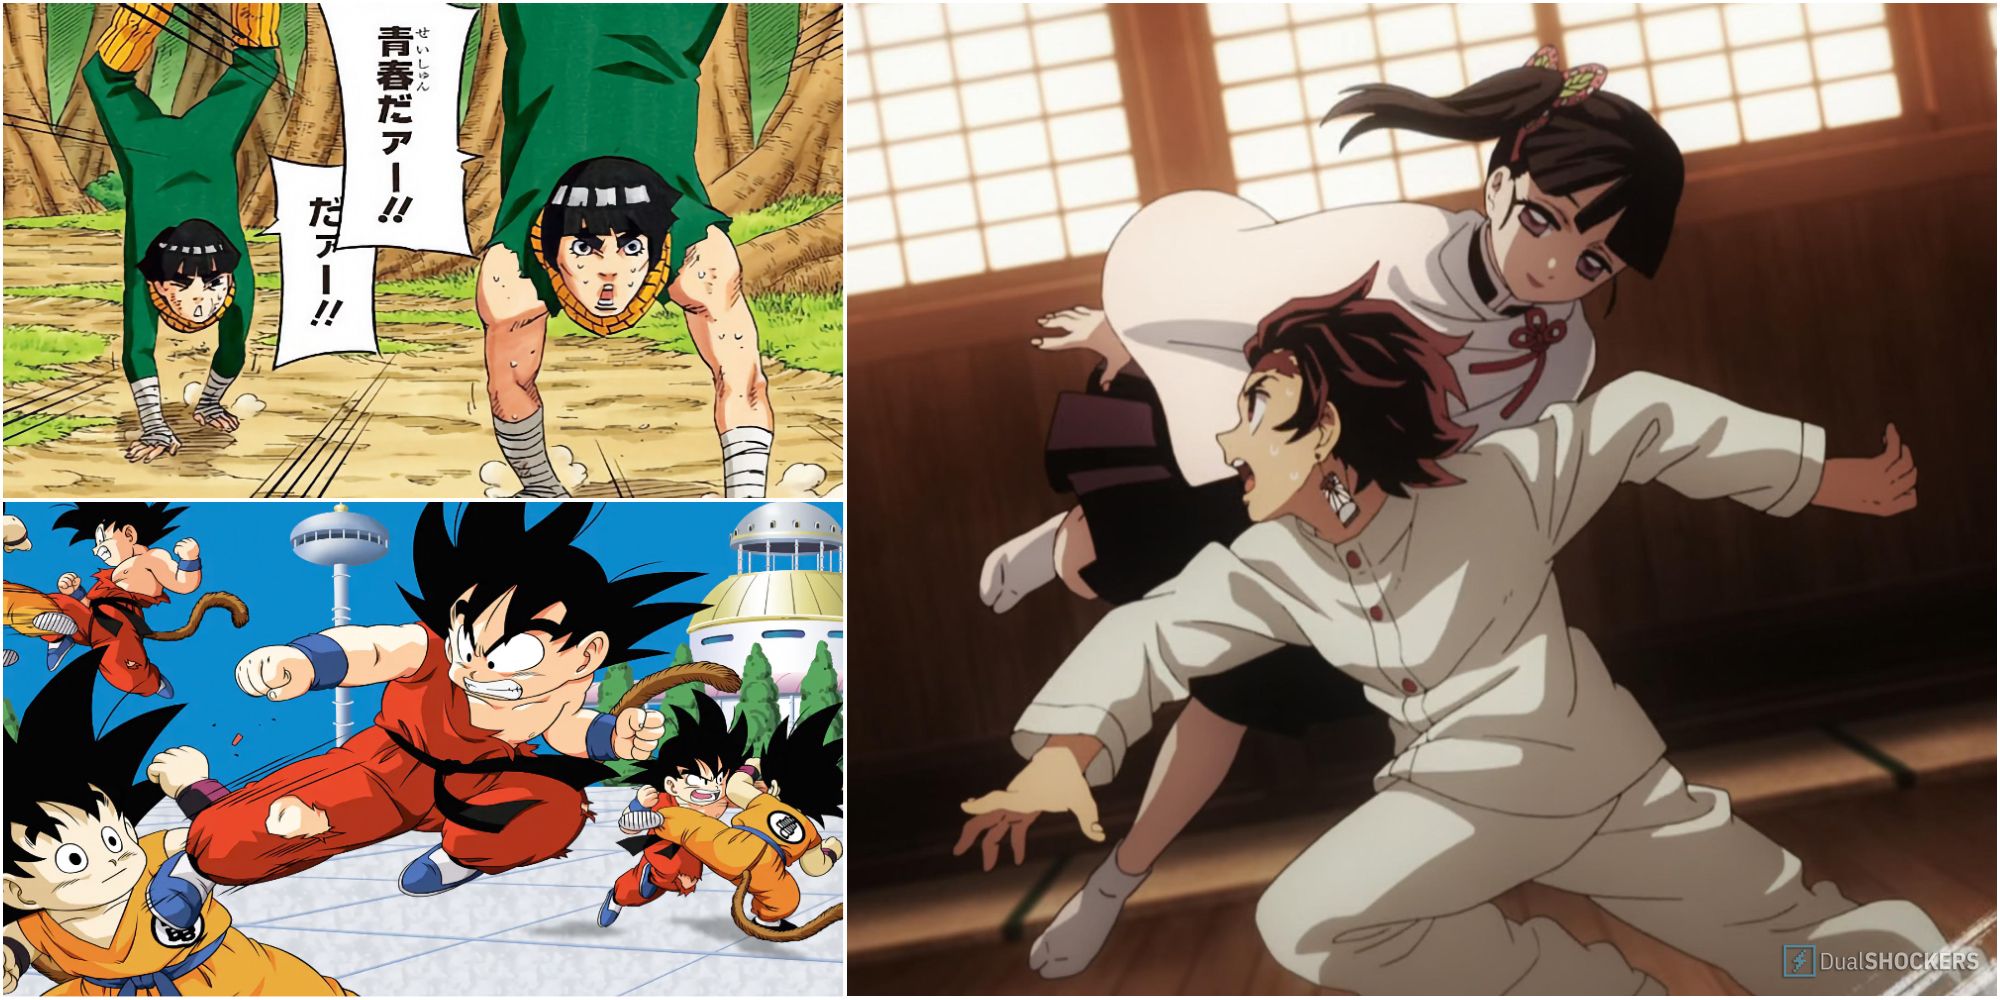 What anime characters went through the most rigorous training in order to  develop their powers? - Quora